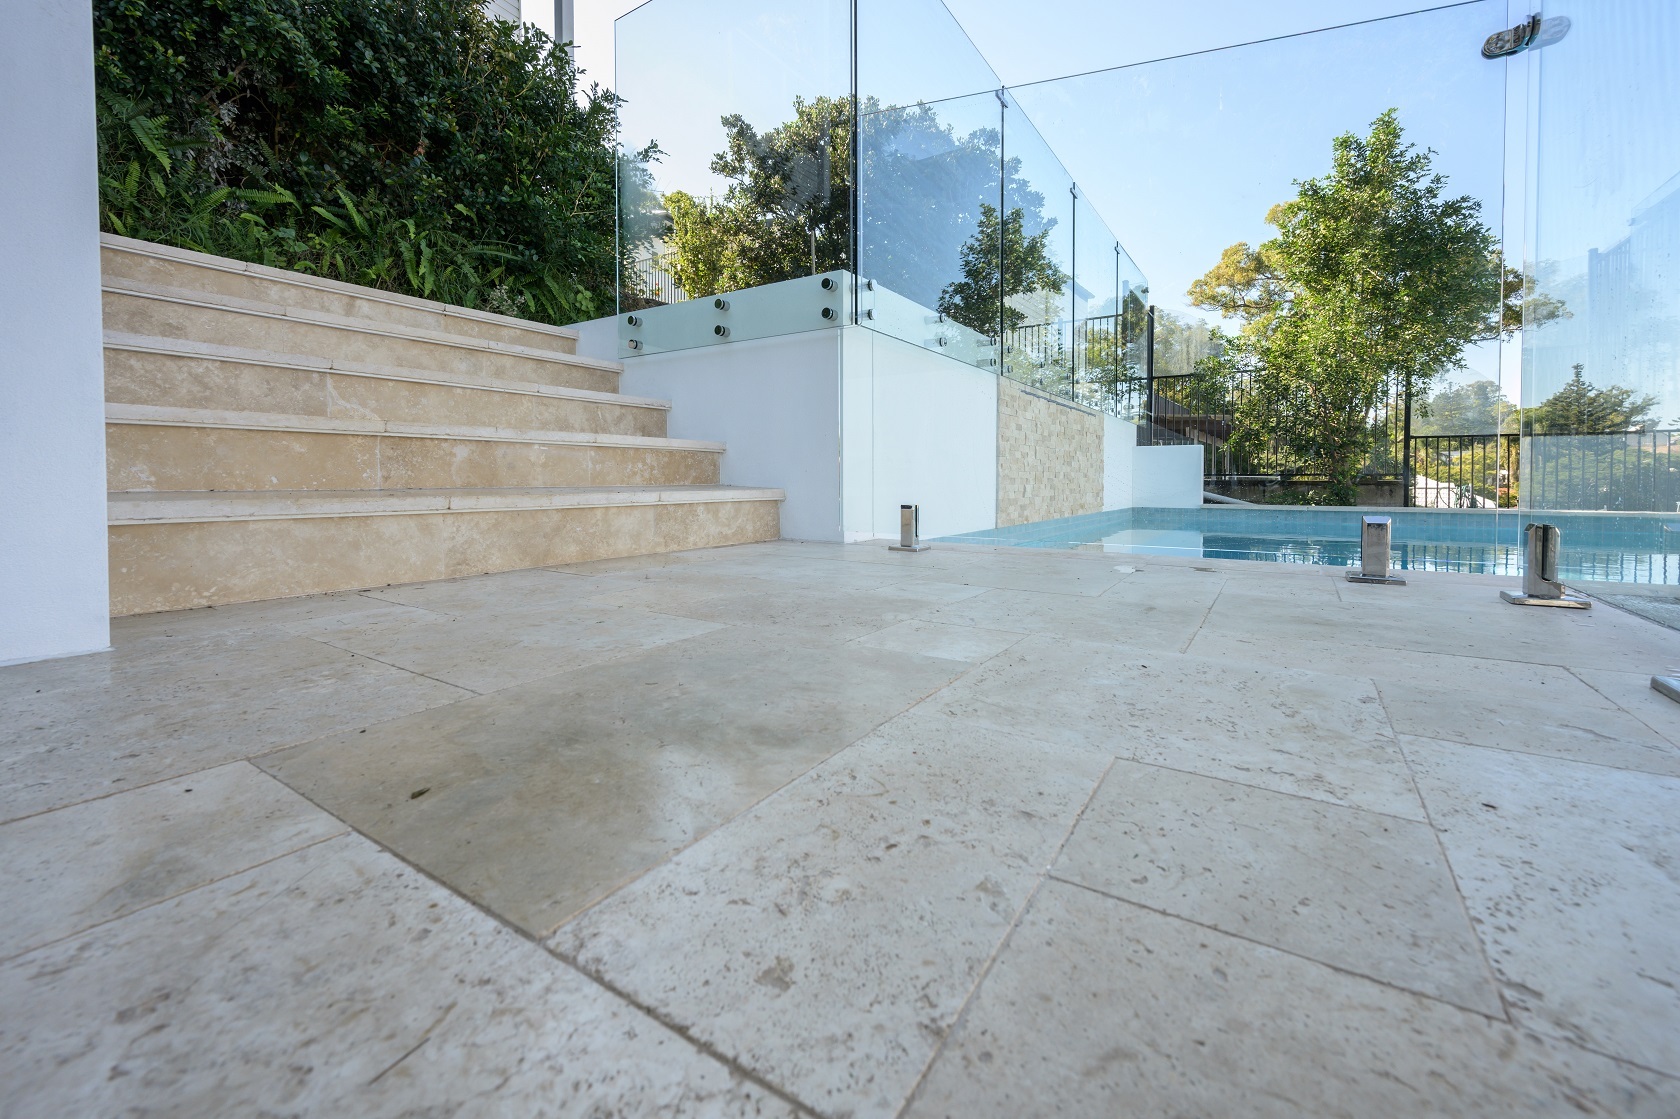 Linen Travertine pool coping and surrounds and stairs with Origami Ice Blue waterline tile and Linen Travertine cladding